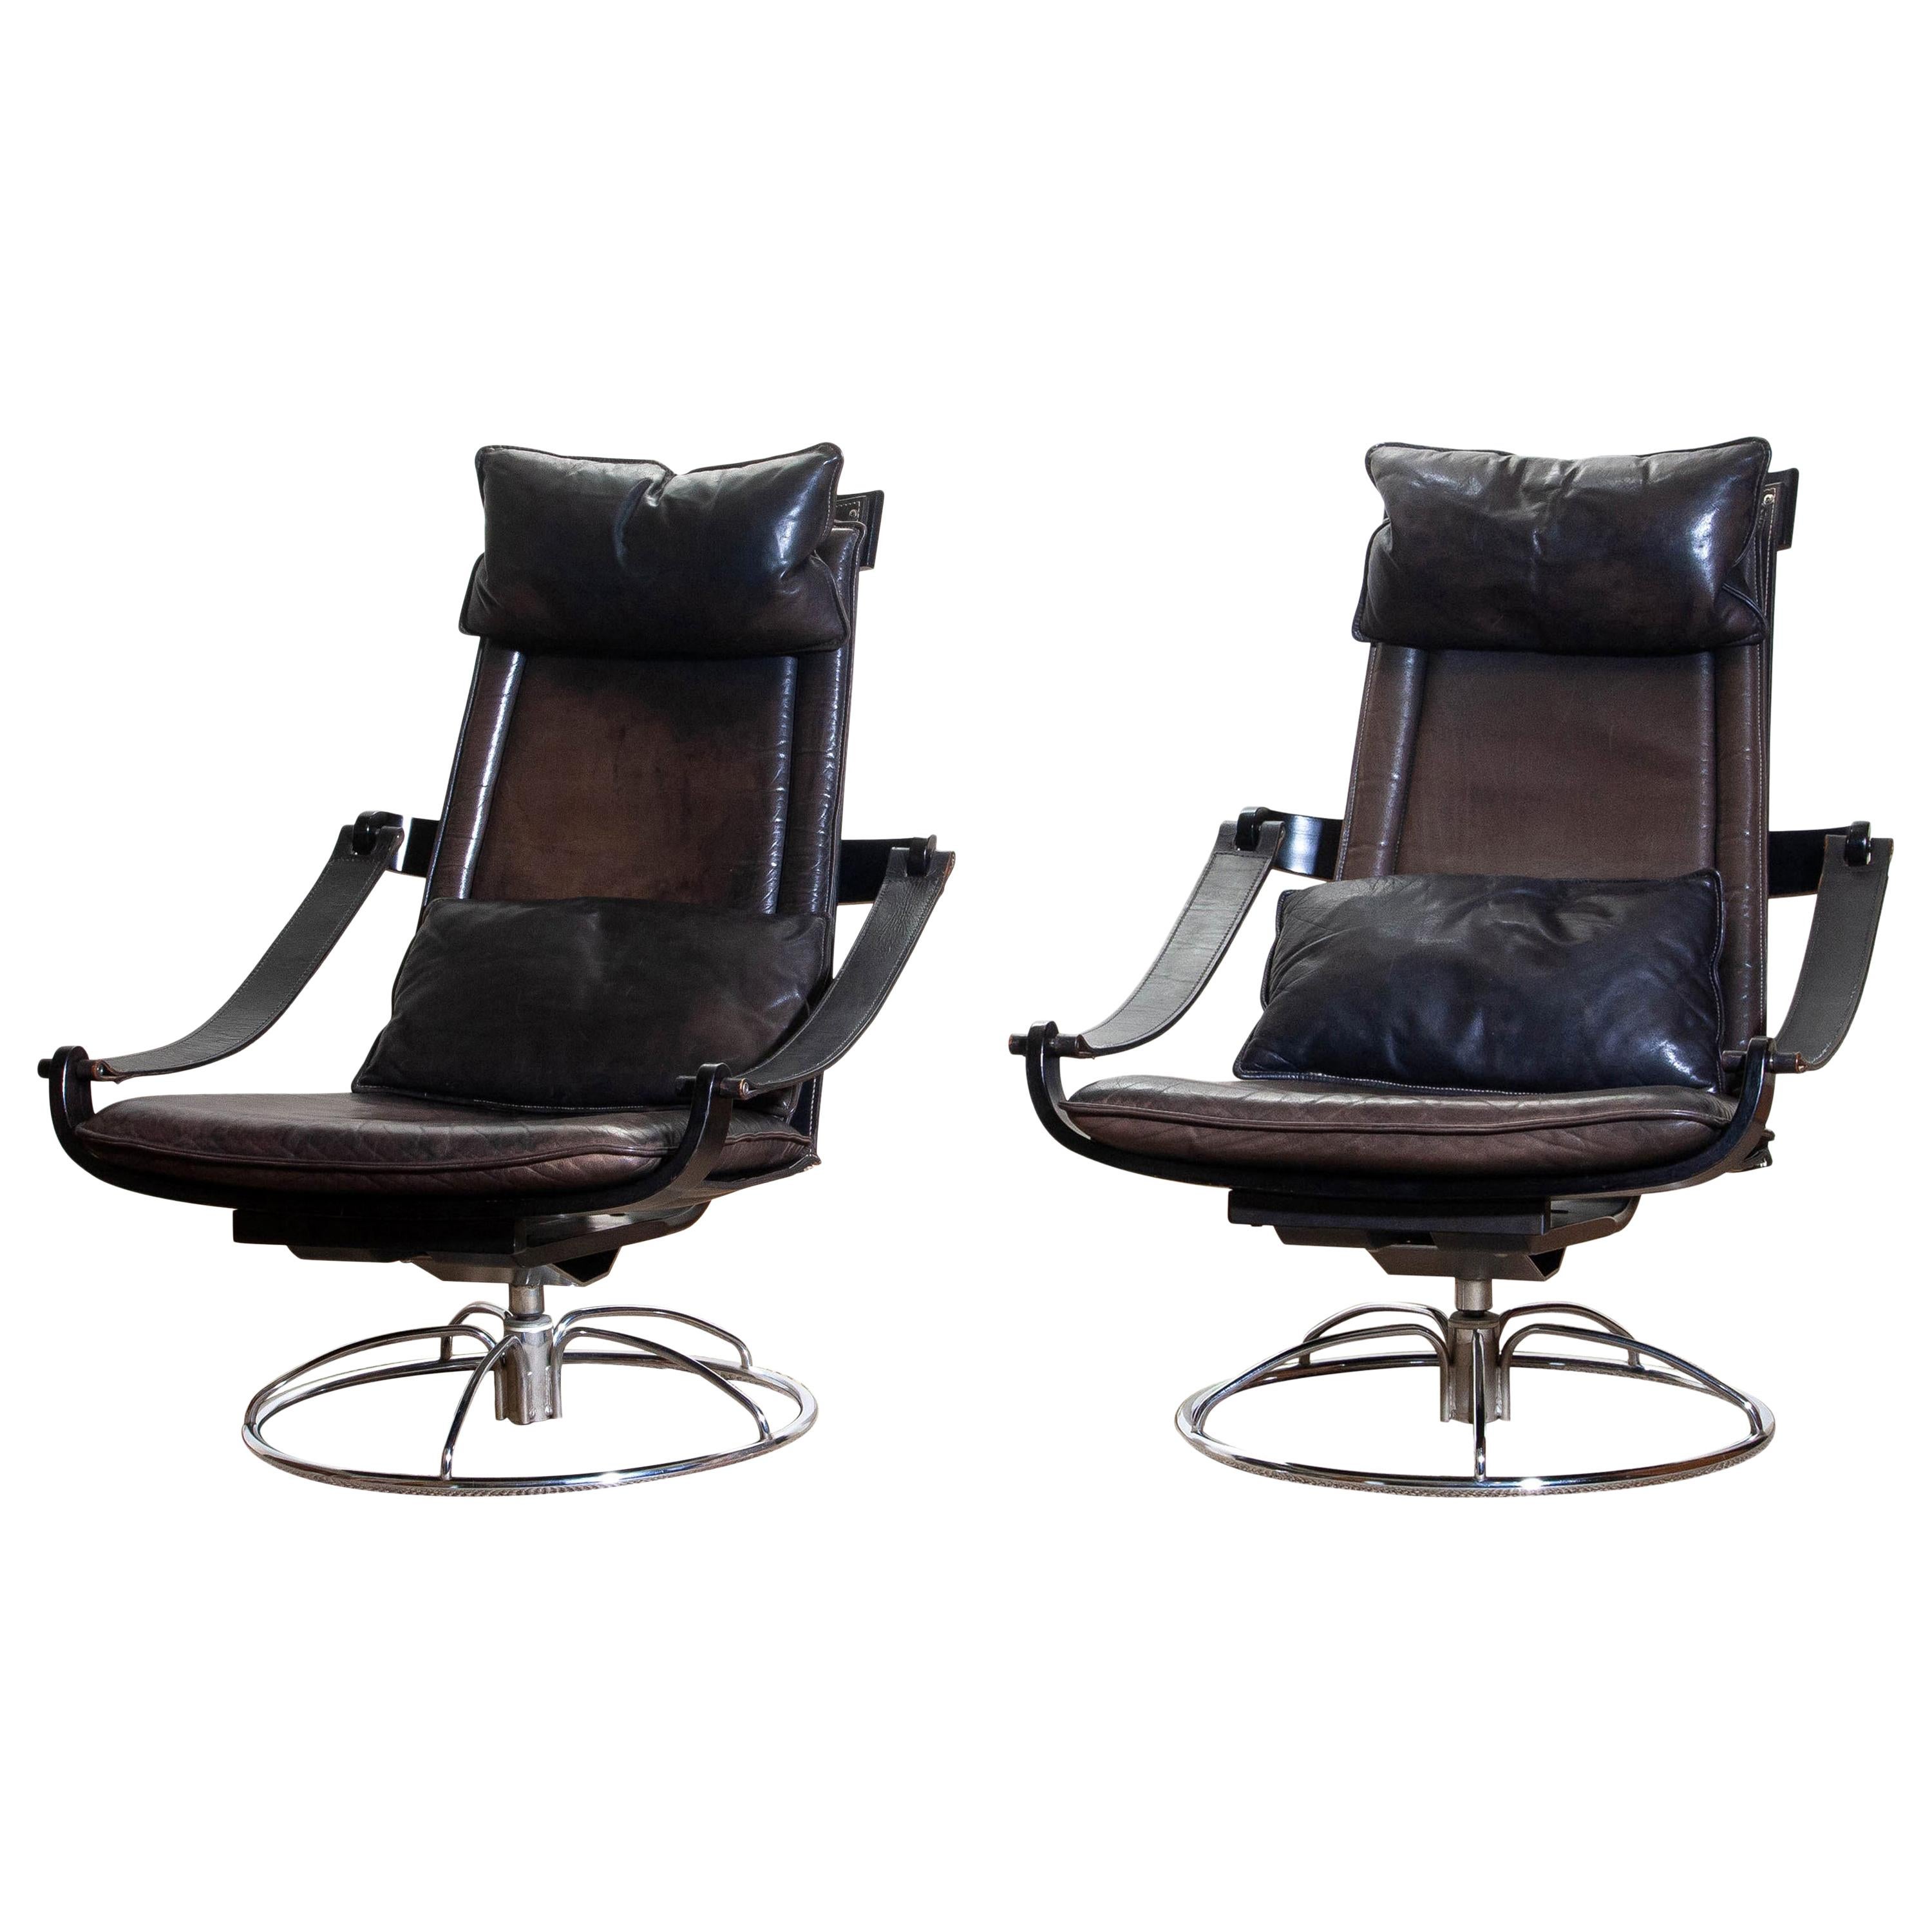 1970s, Pair of Artistic Leather Swivel Chairs by Ake Fribytter for Nelo, Sweden